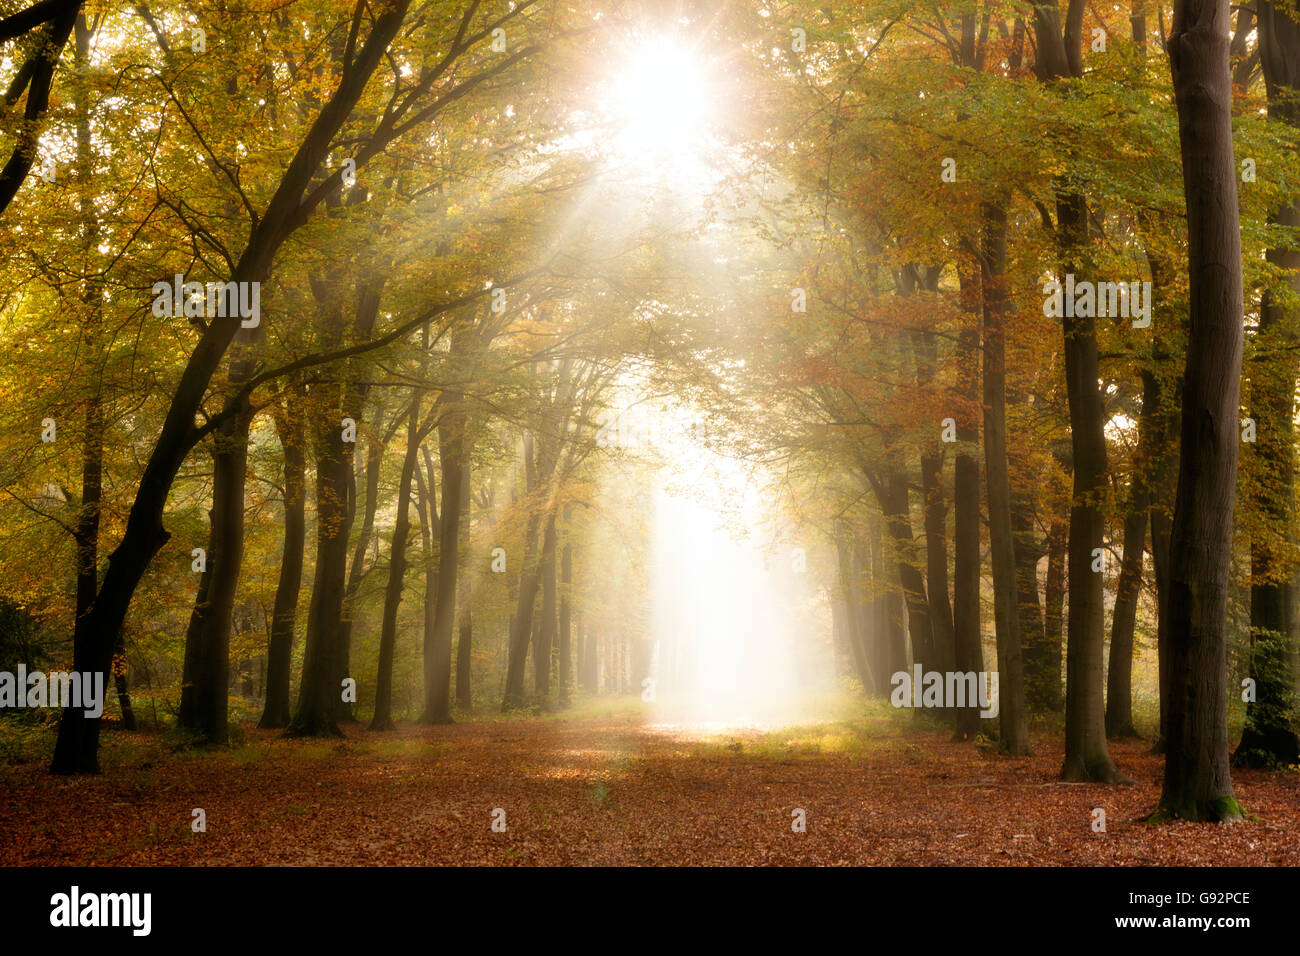 Sunlight shining through the trees in a forest during Autumn Stock Photo